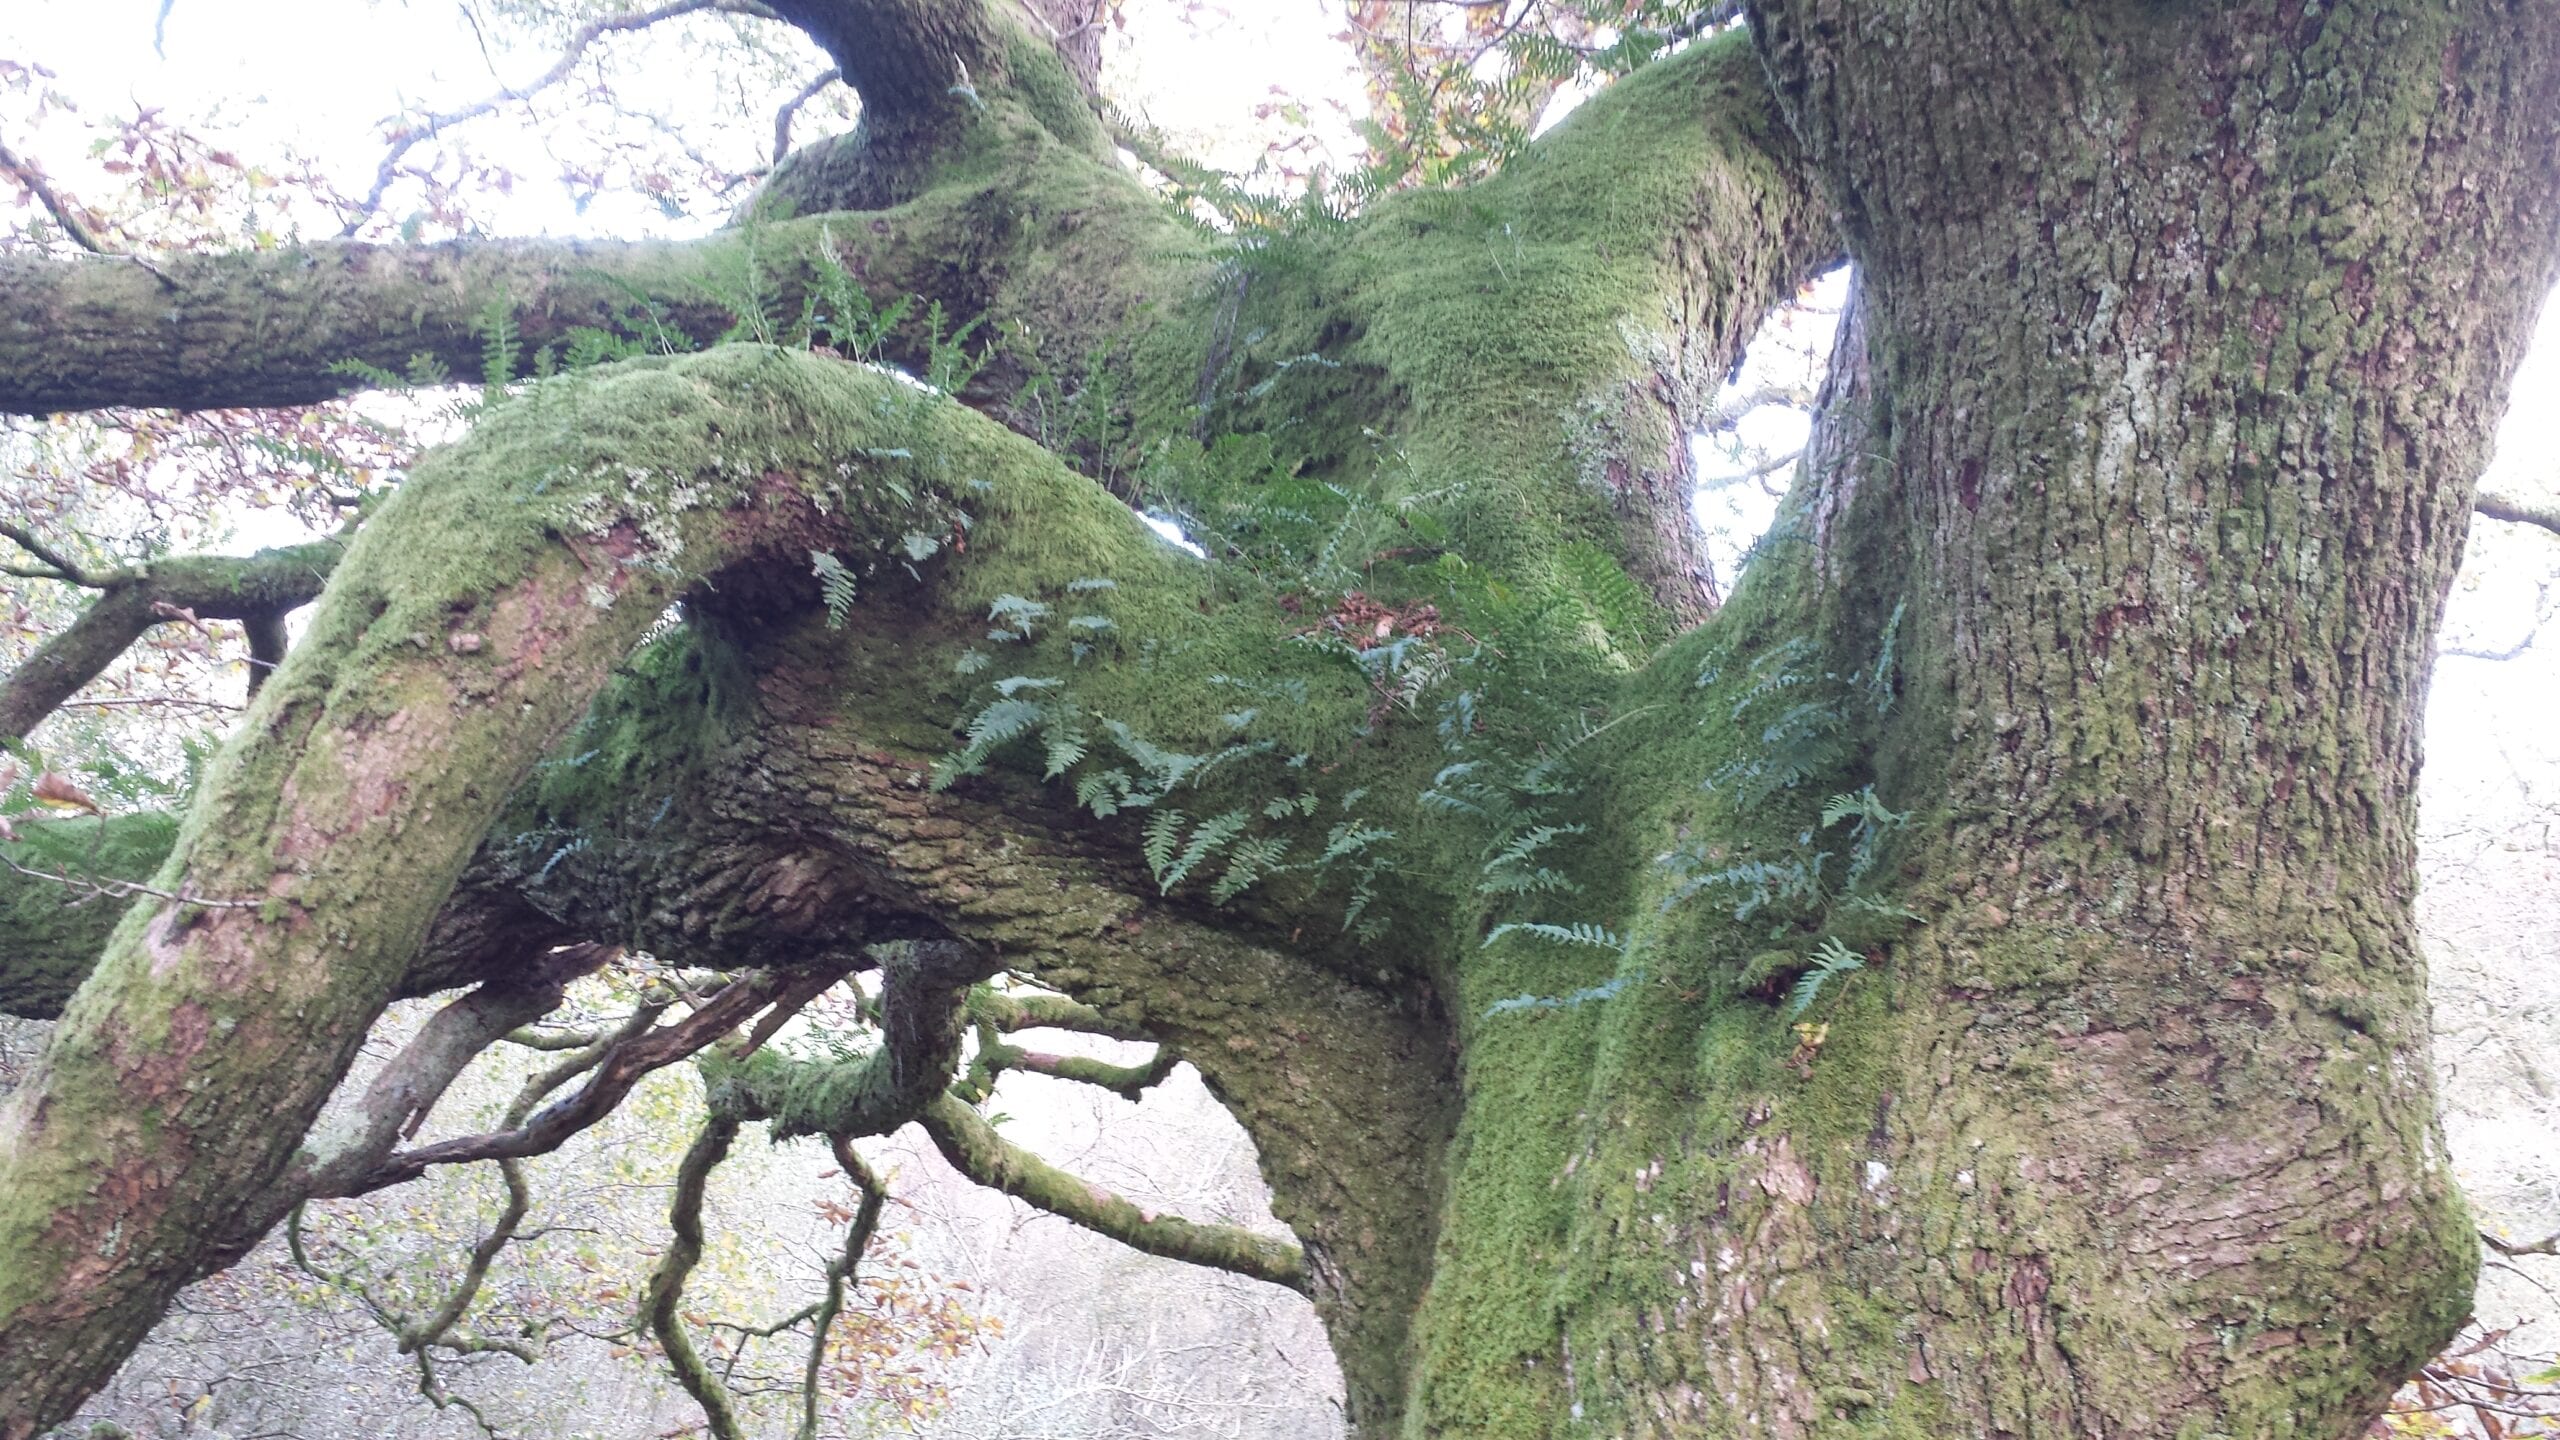 Moss and ferns on tree